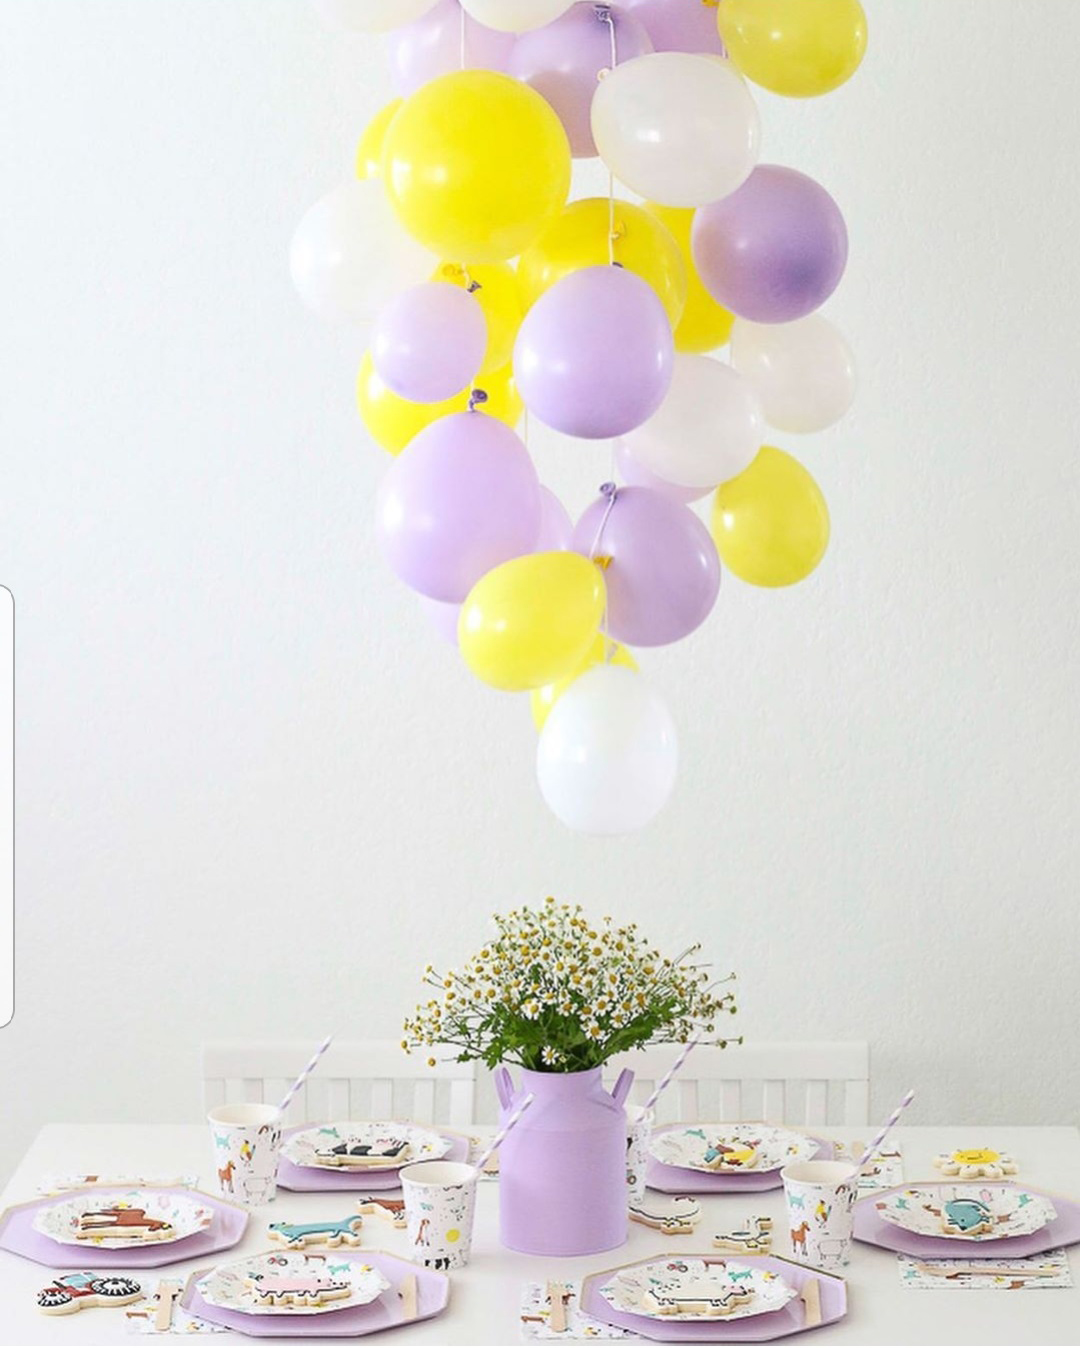 Decorate a room with balloons, no helium needed